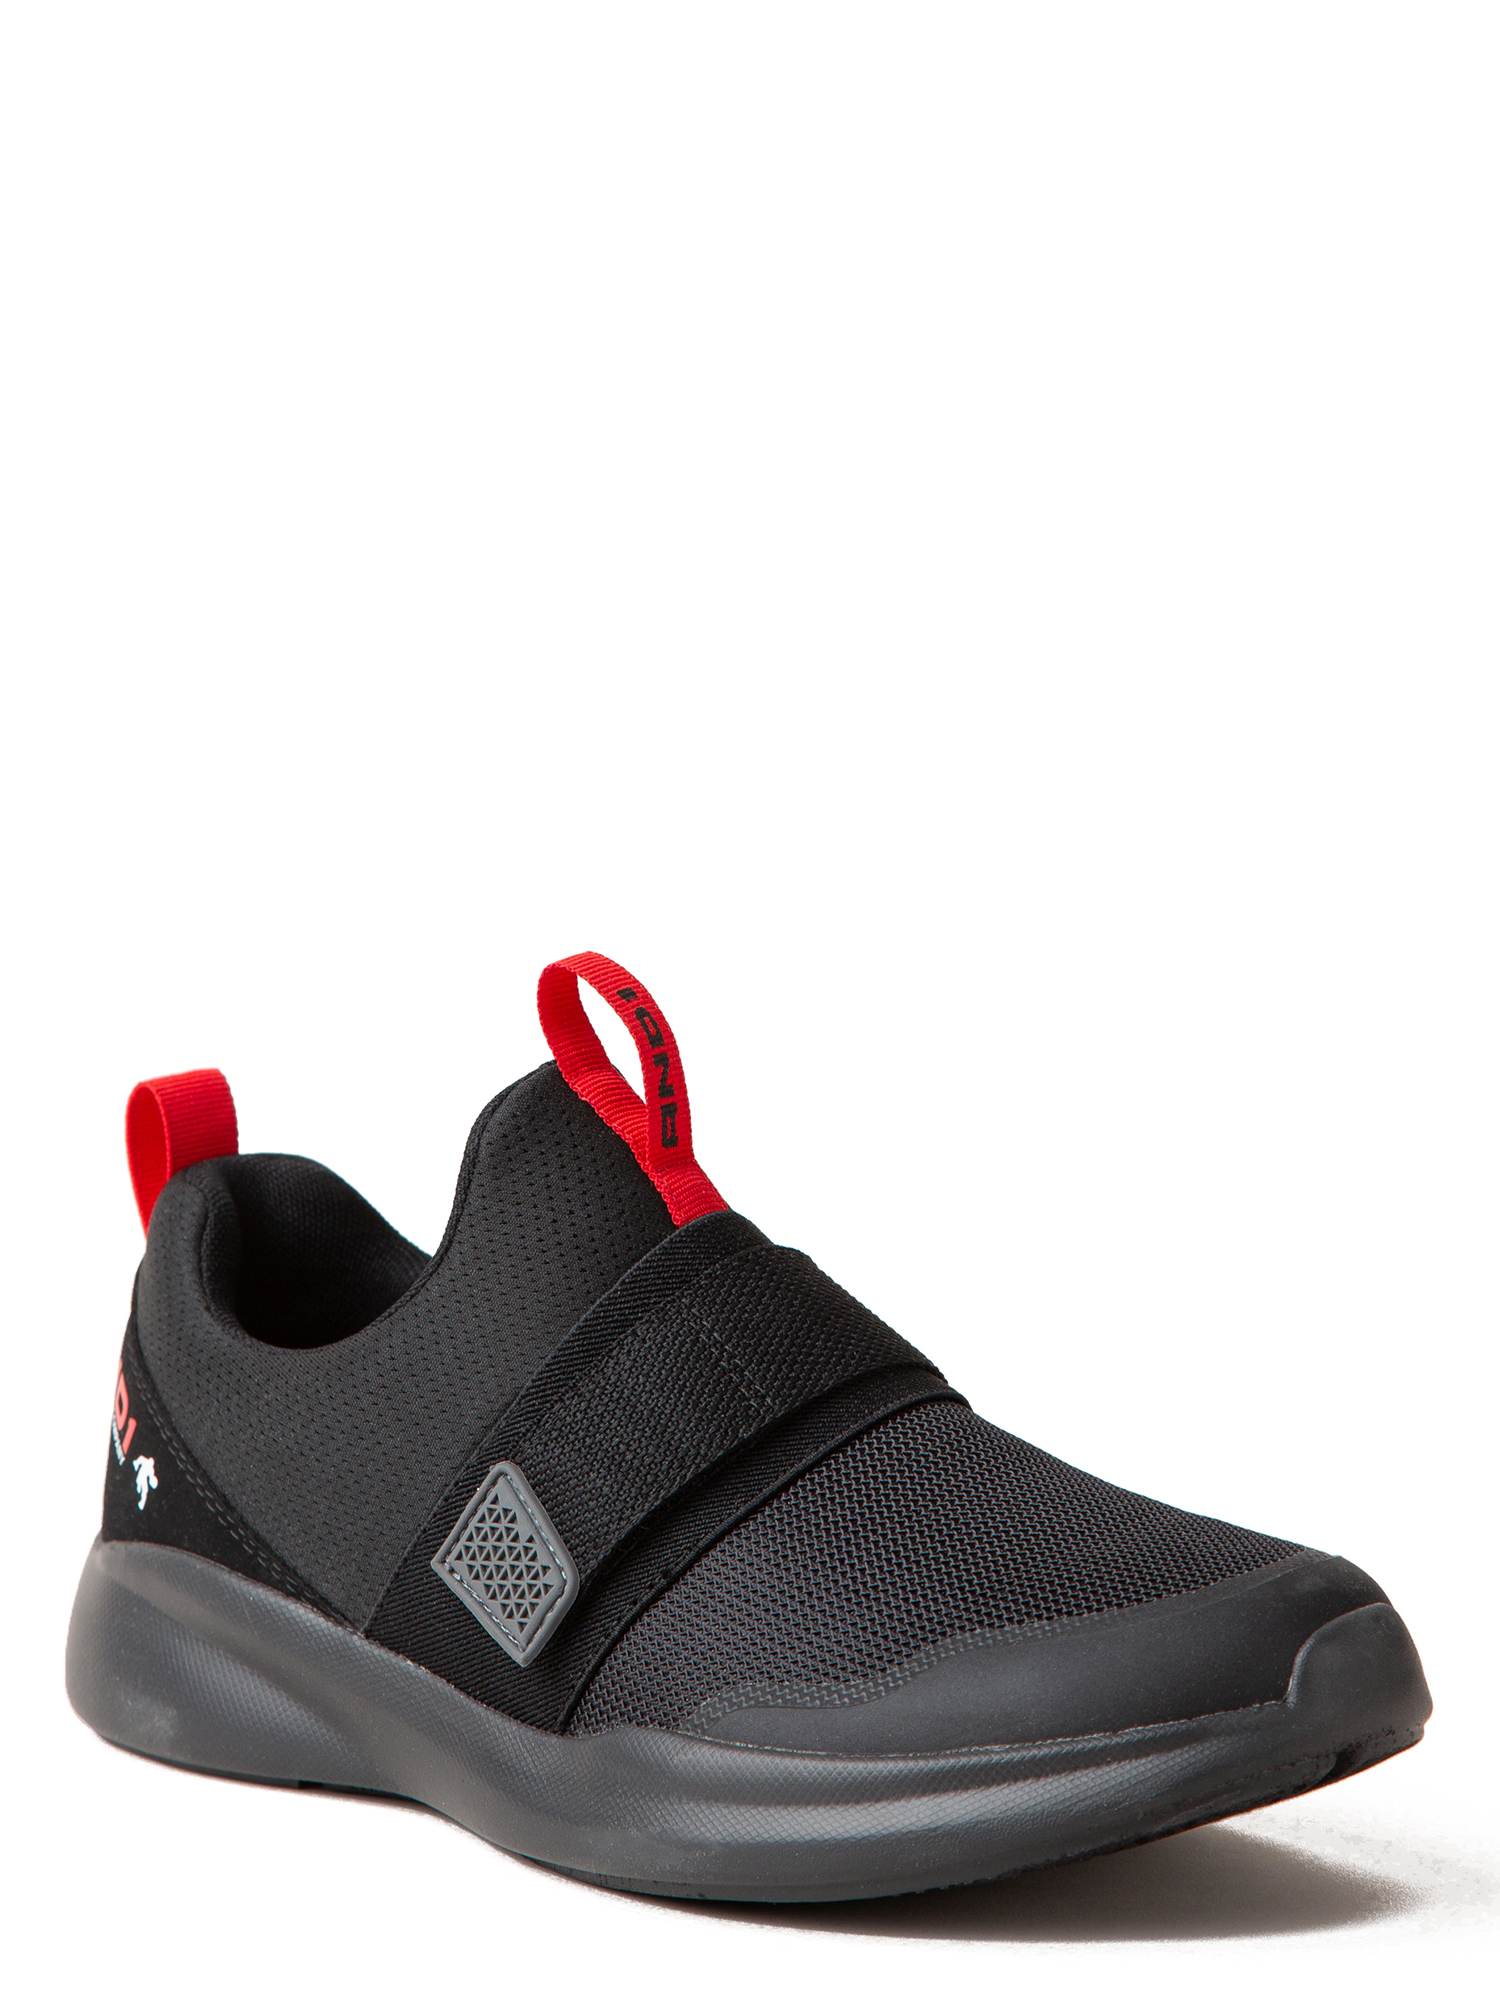 AND1 Men's Coach 3.0 Athletic Shoe - image 1 of 6